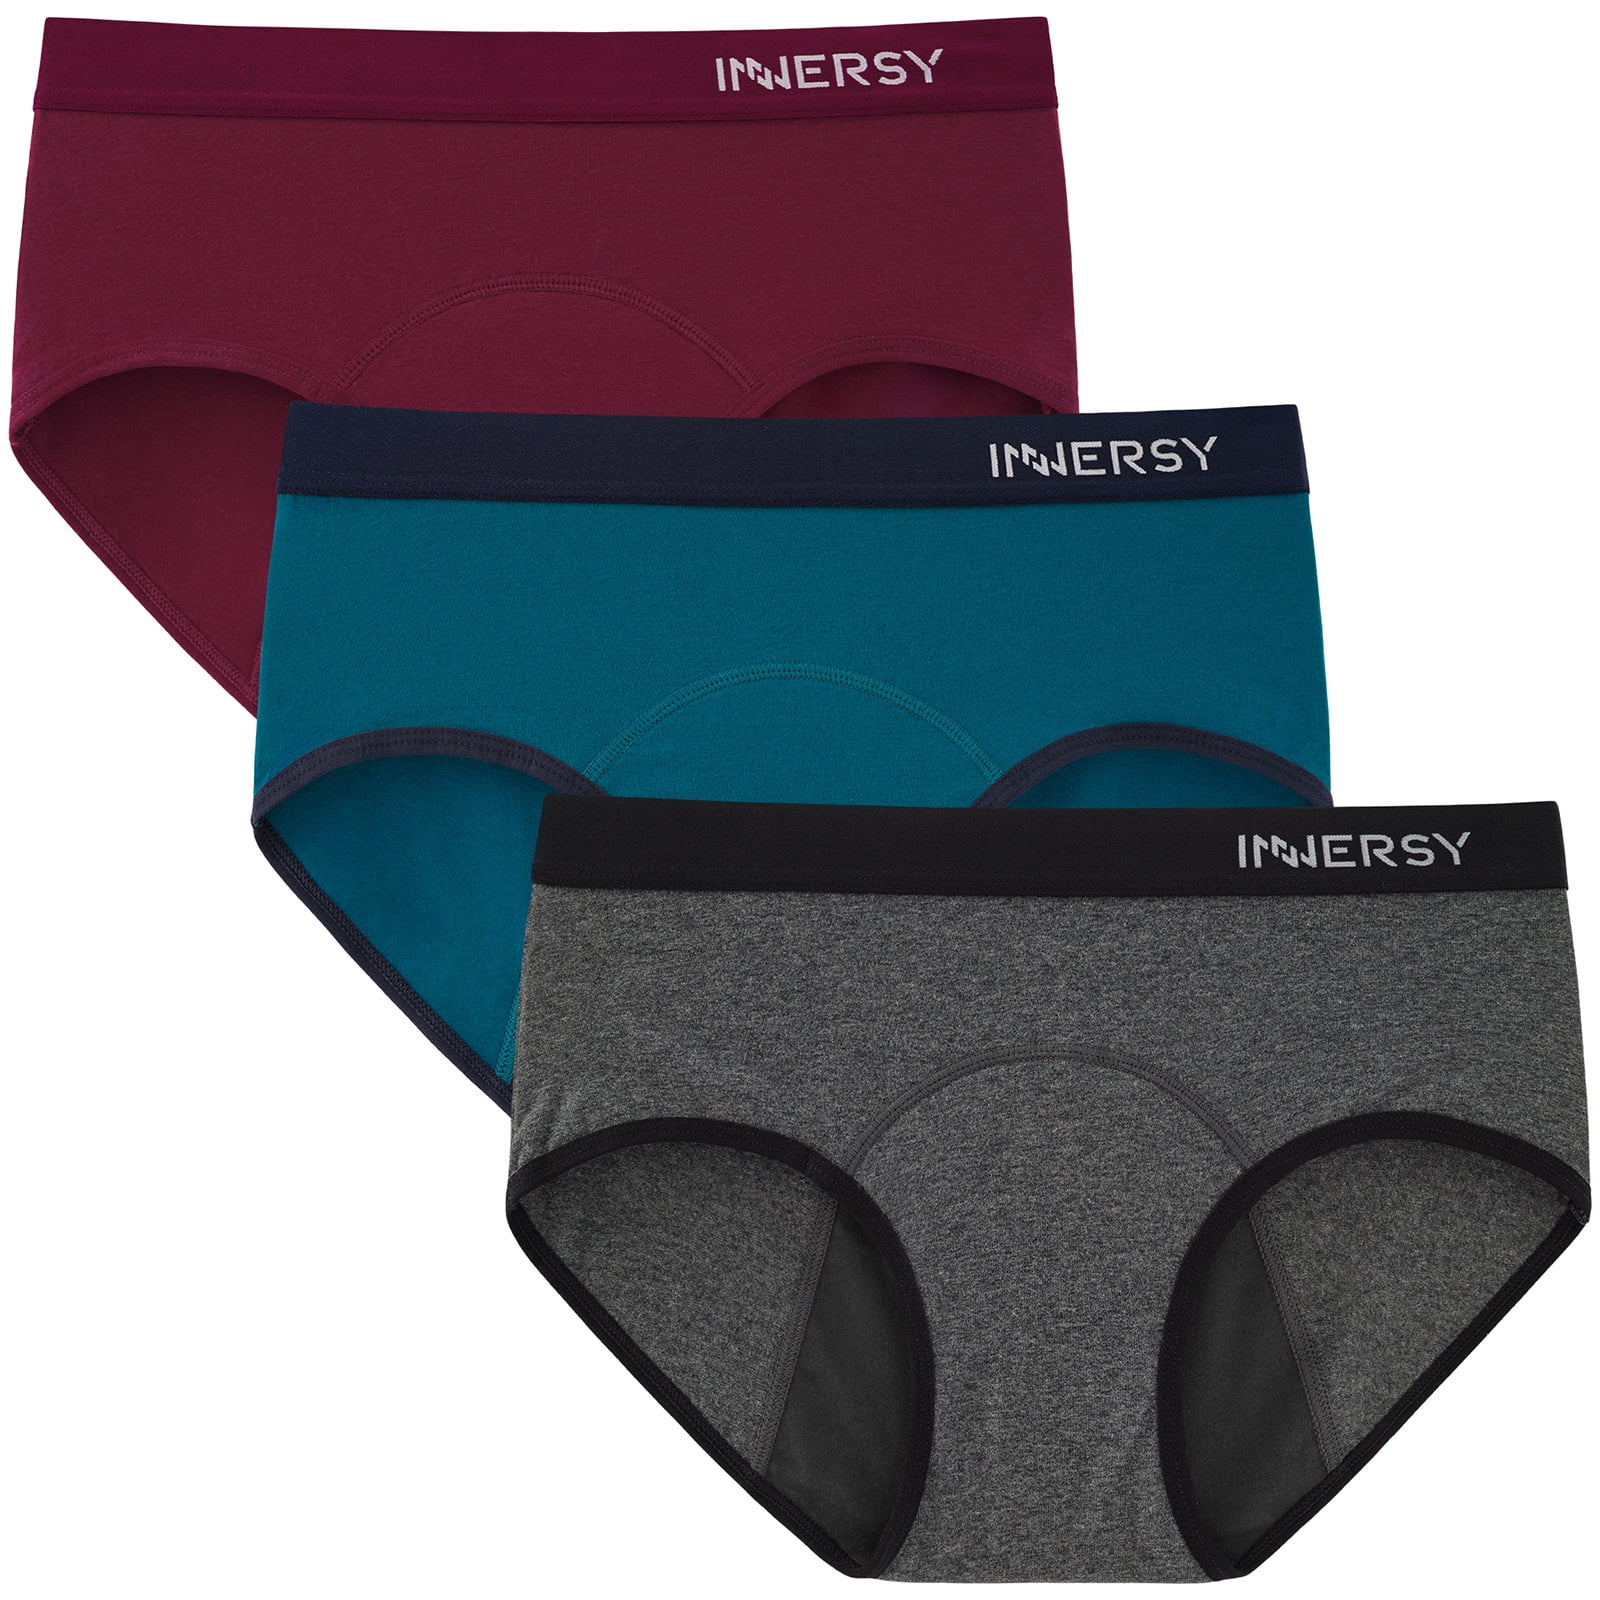 INNERSY Period Panties For Women Cotton Mid/Low Rise Menstrual Underwear 3  Pack (2XL, Gray/Claret/Lake Blue) 